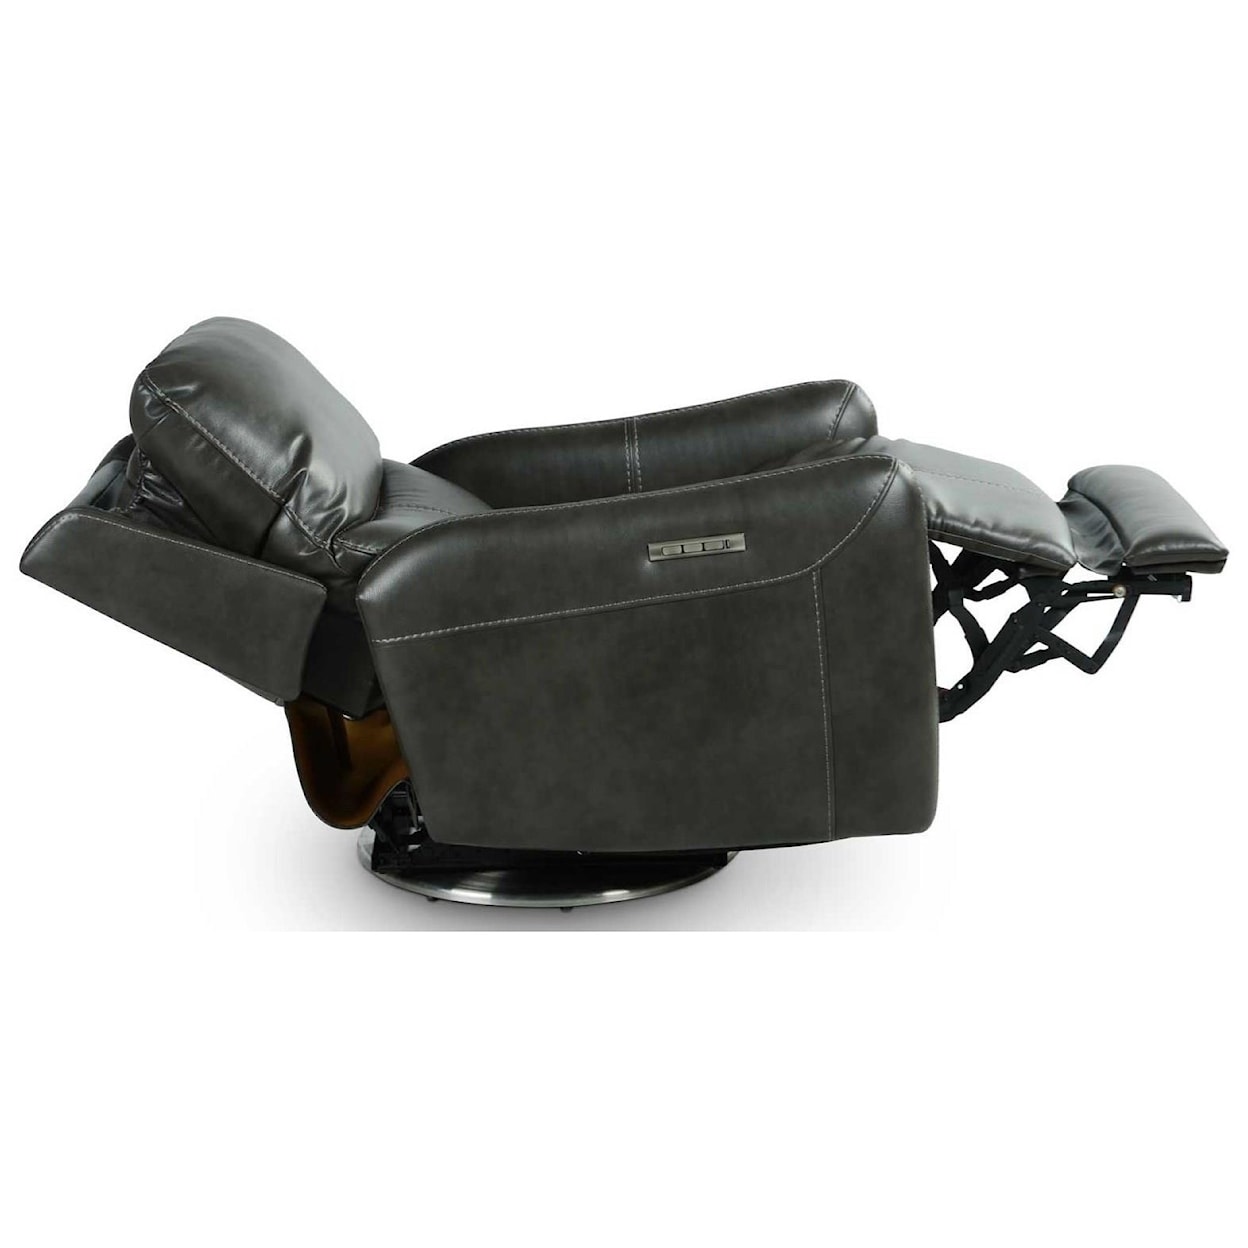 Steve Silver Athens Swivel Motion Chair